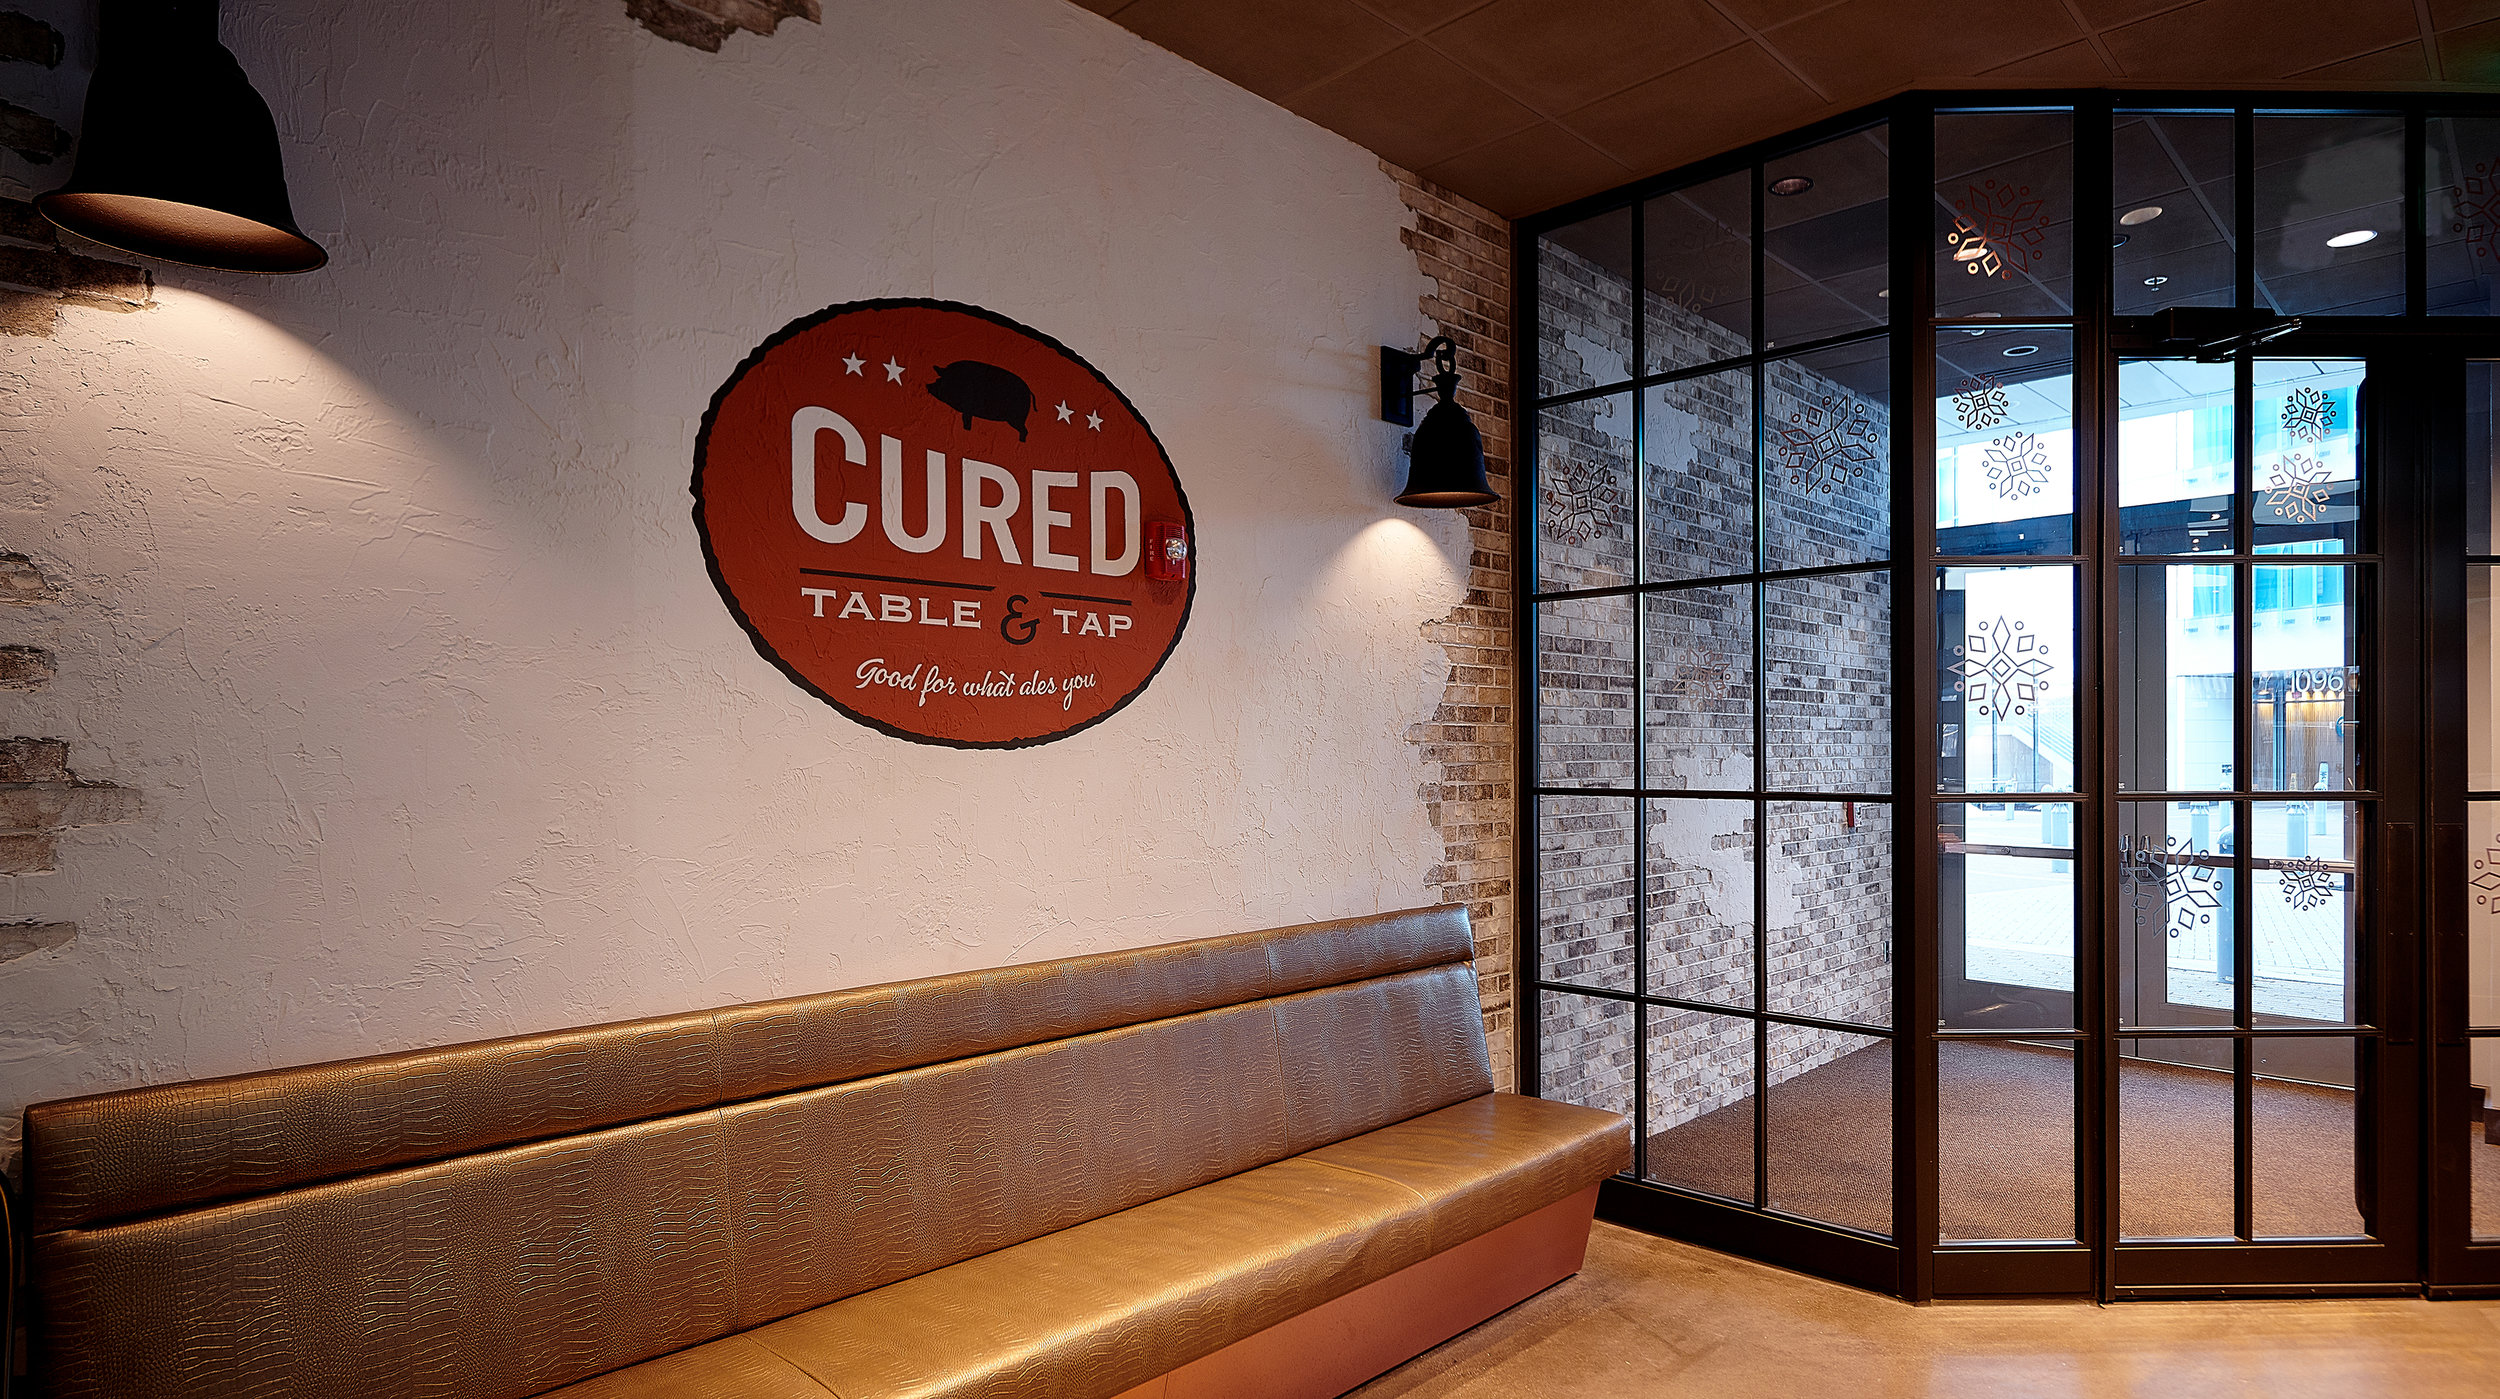 Cured-18th&21st_Lena-Munther_2019-01-203133 2.jpg